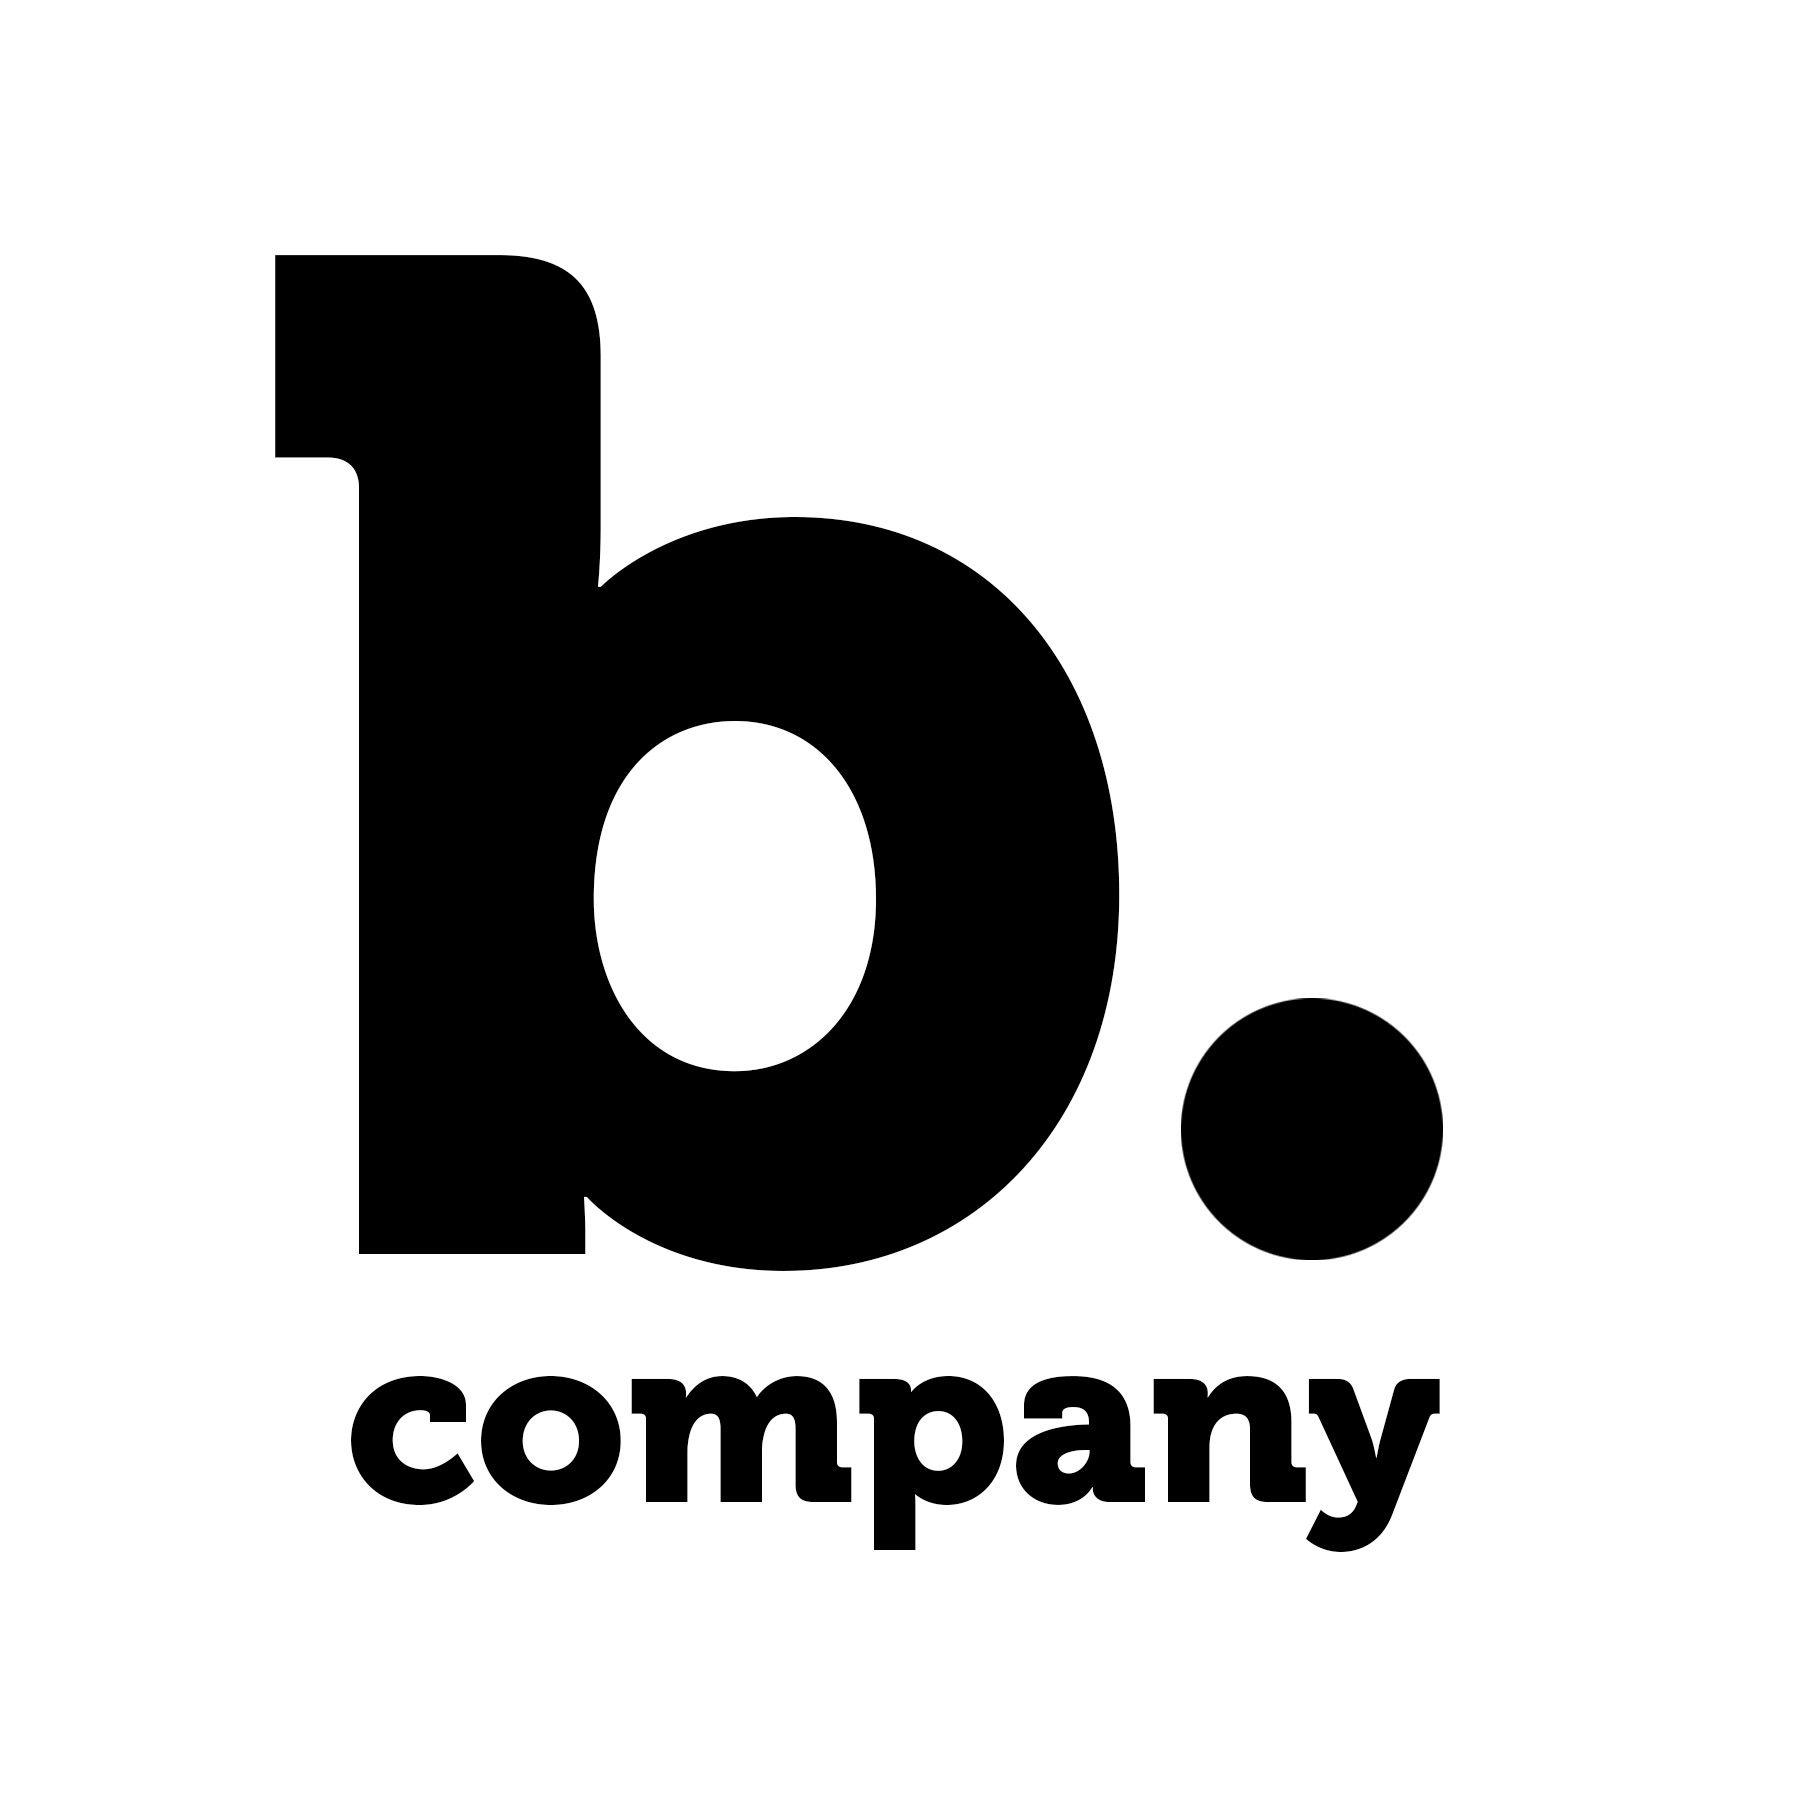 B Company Logo - A' Design Award and Competition - Moerie Beauty Care Products Press Kit